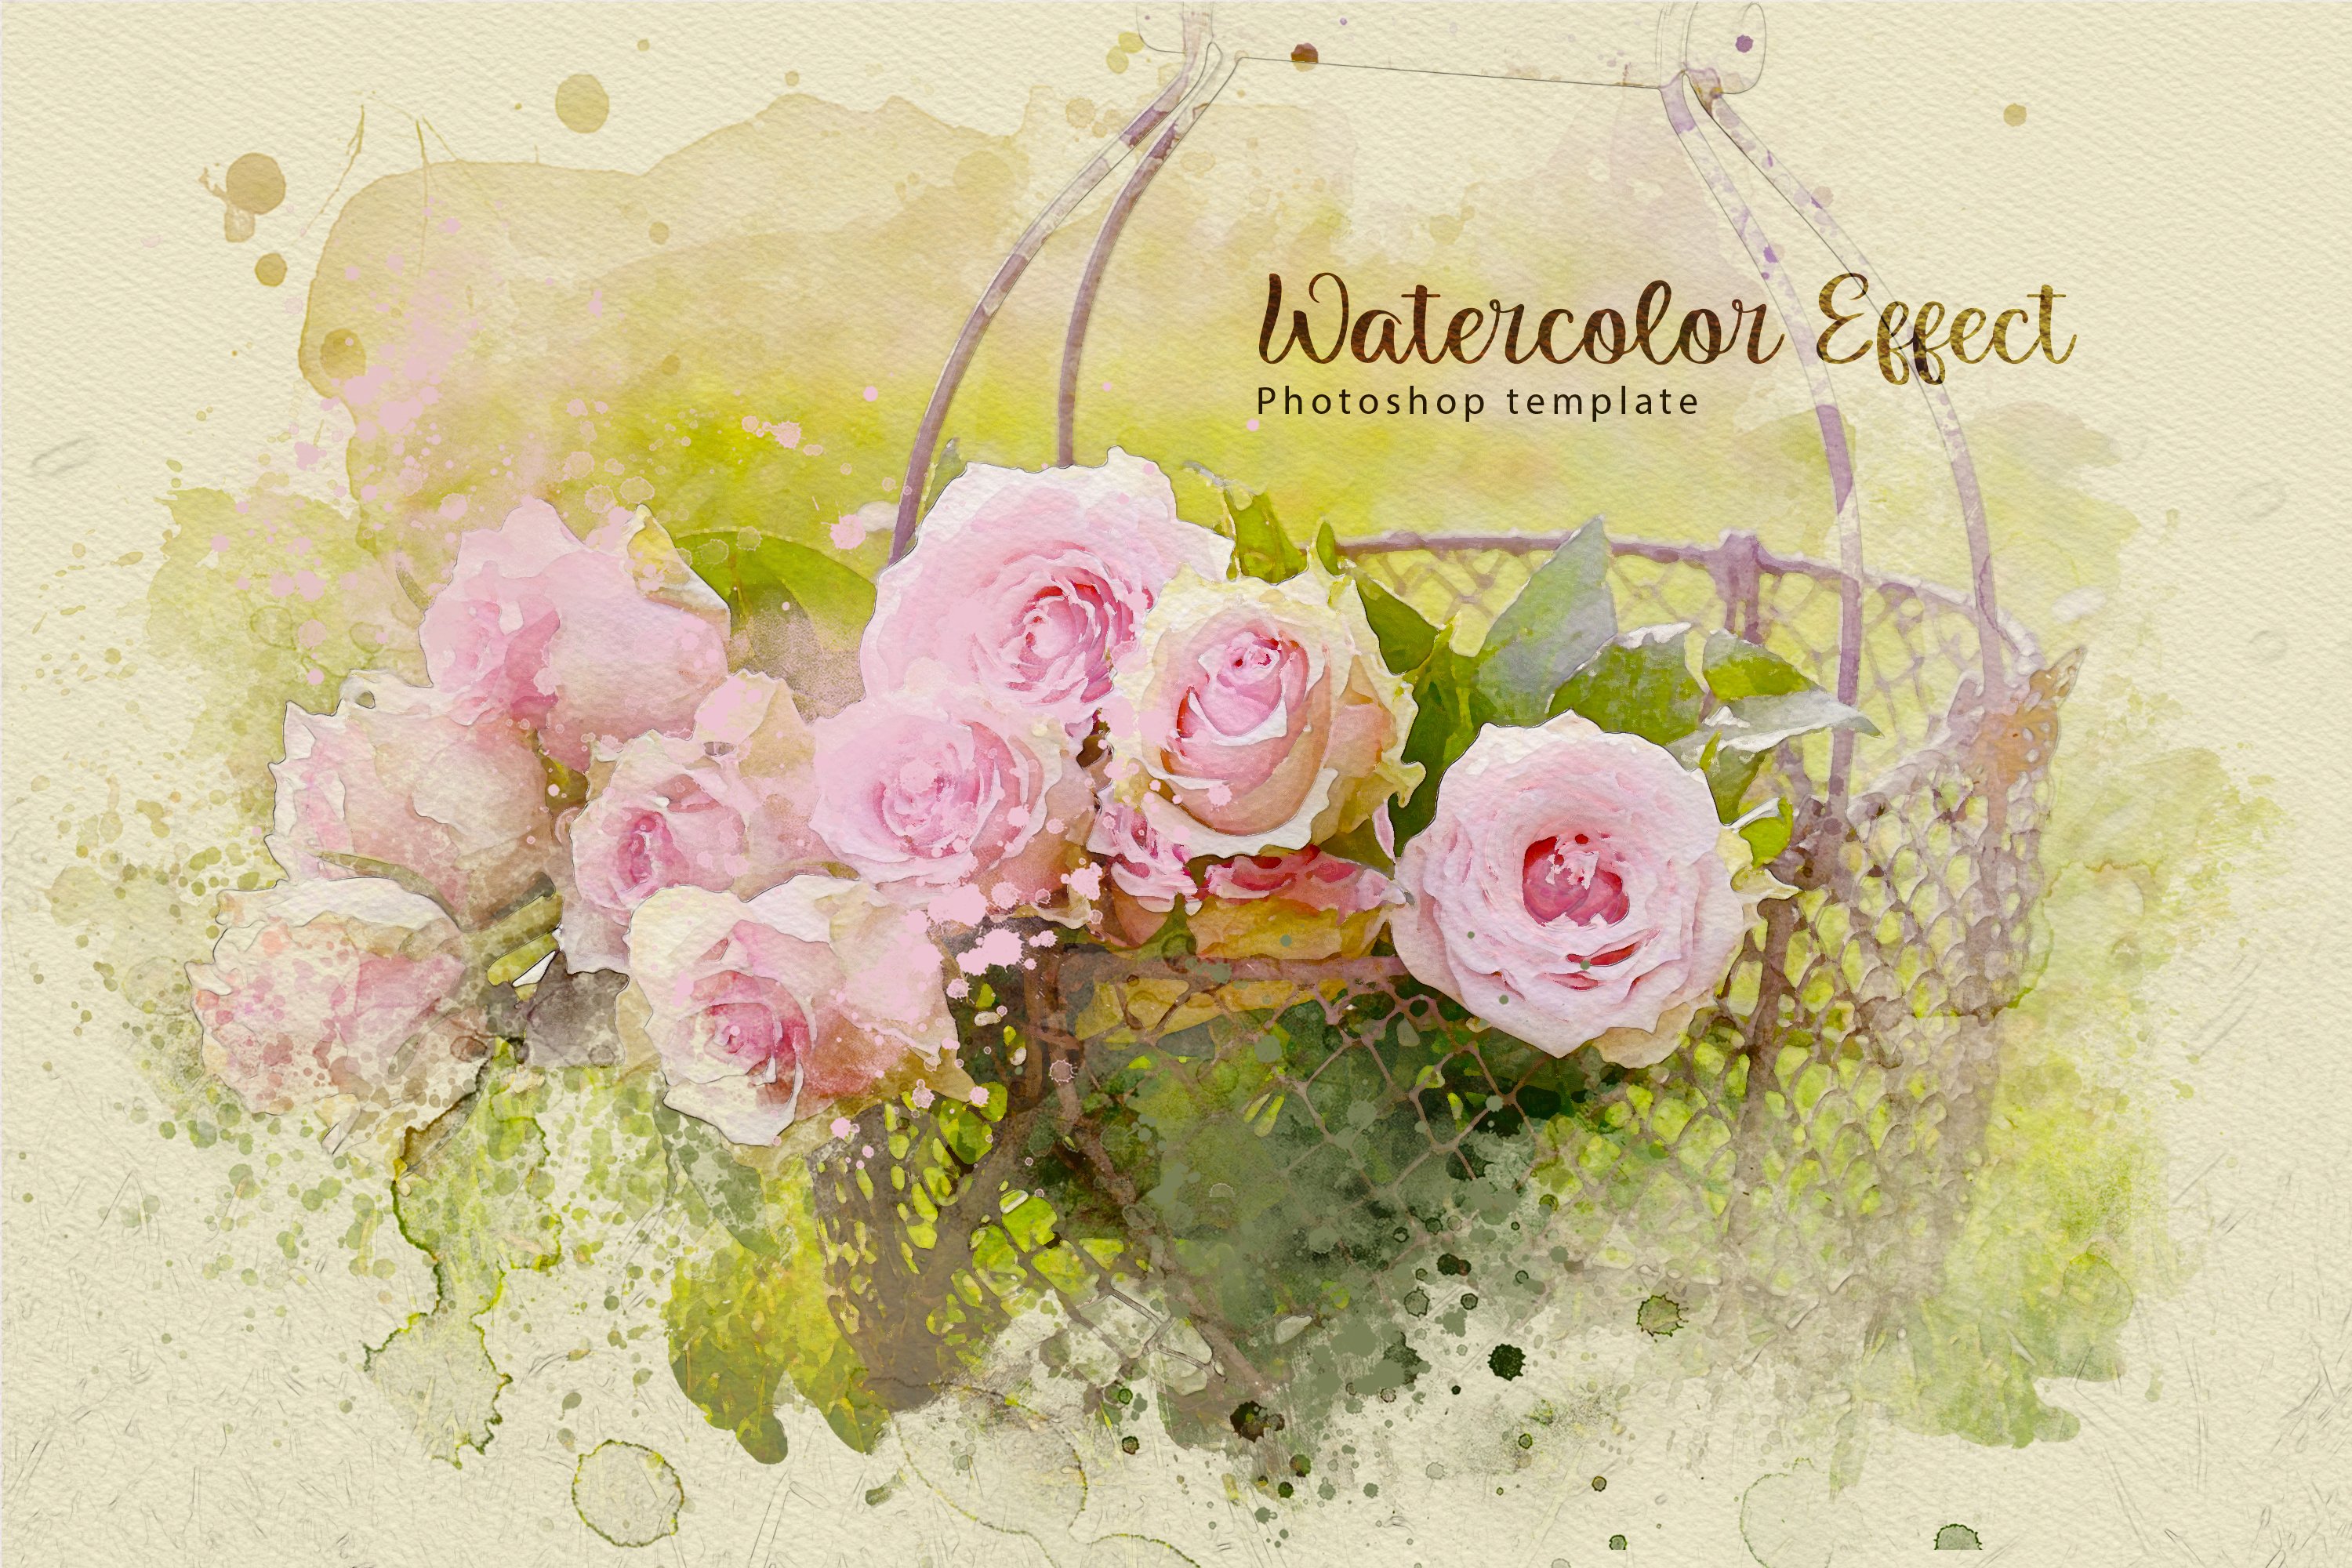 Realistic Watercolor Photo Effectcover image.